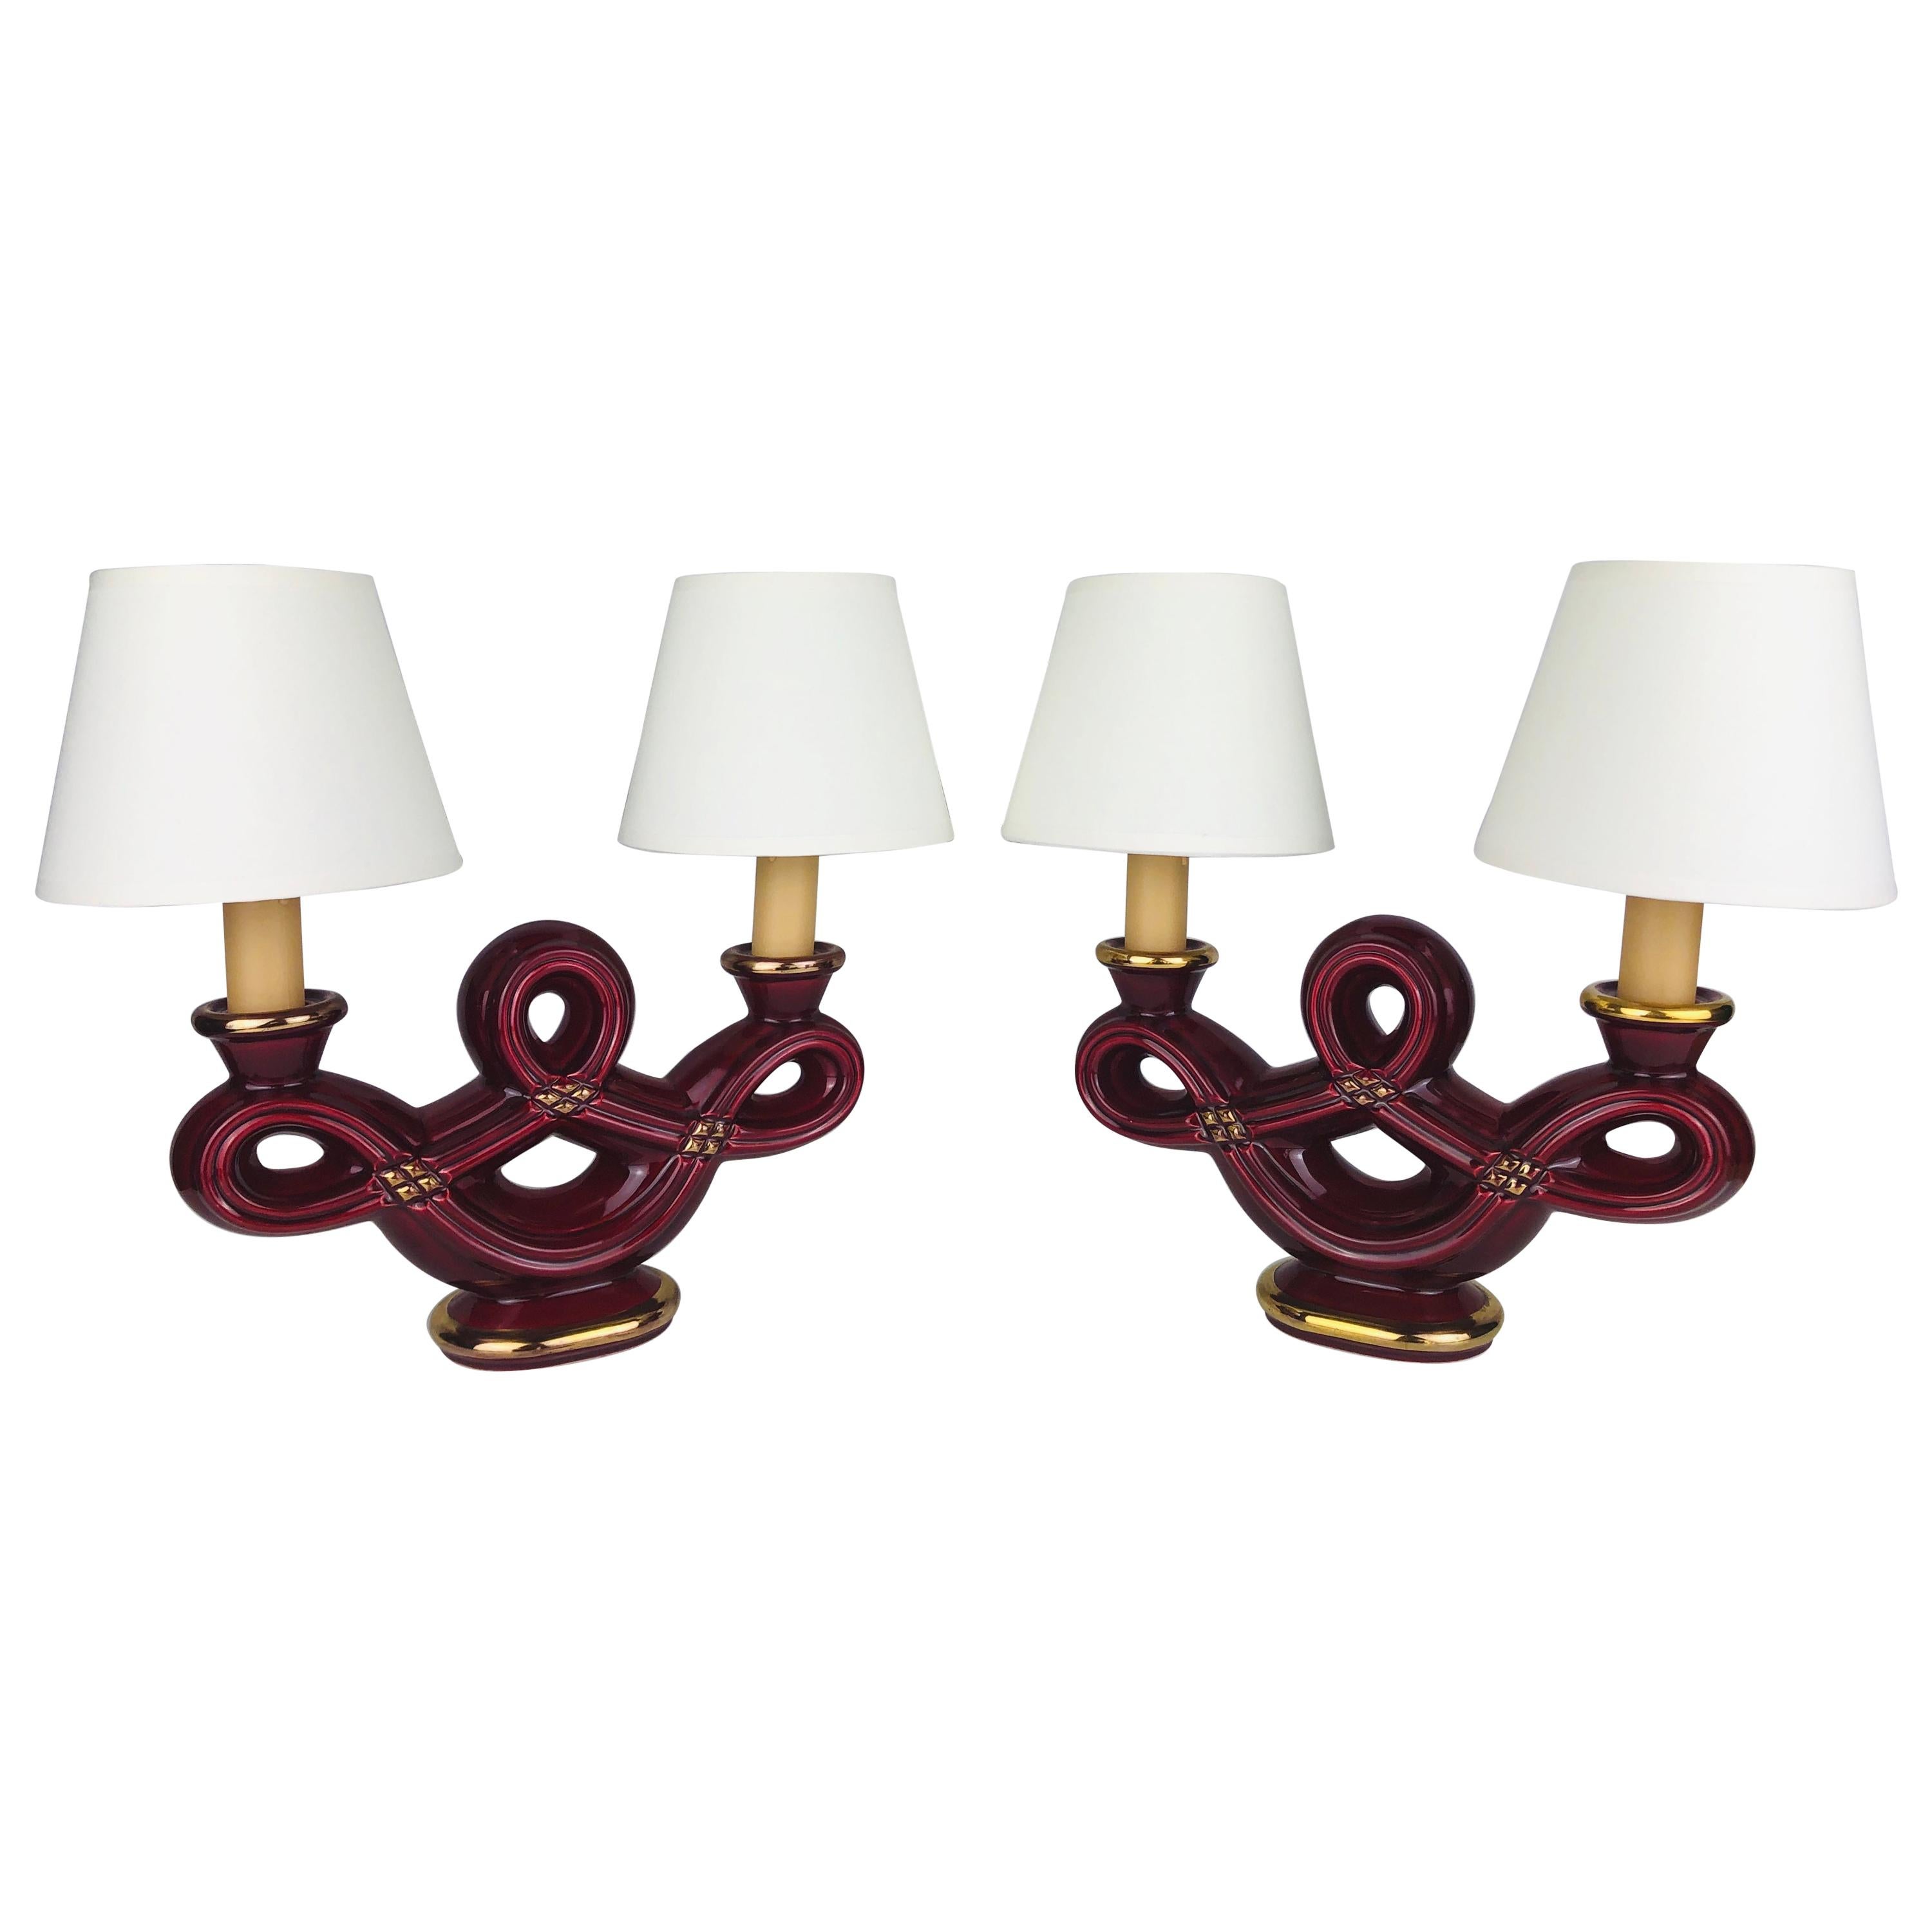 Pair of French Art Deco Burgundy and Gold Trimmed Swirled Faience Table Lamps For Sale